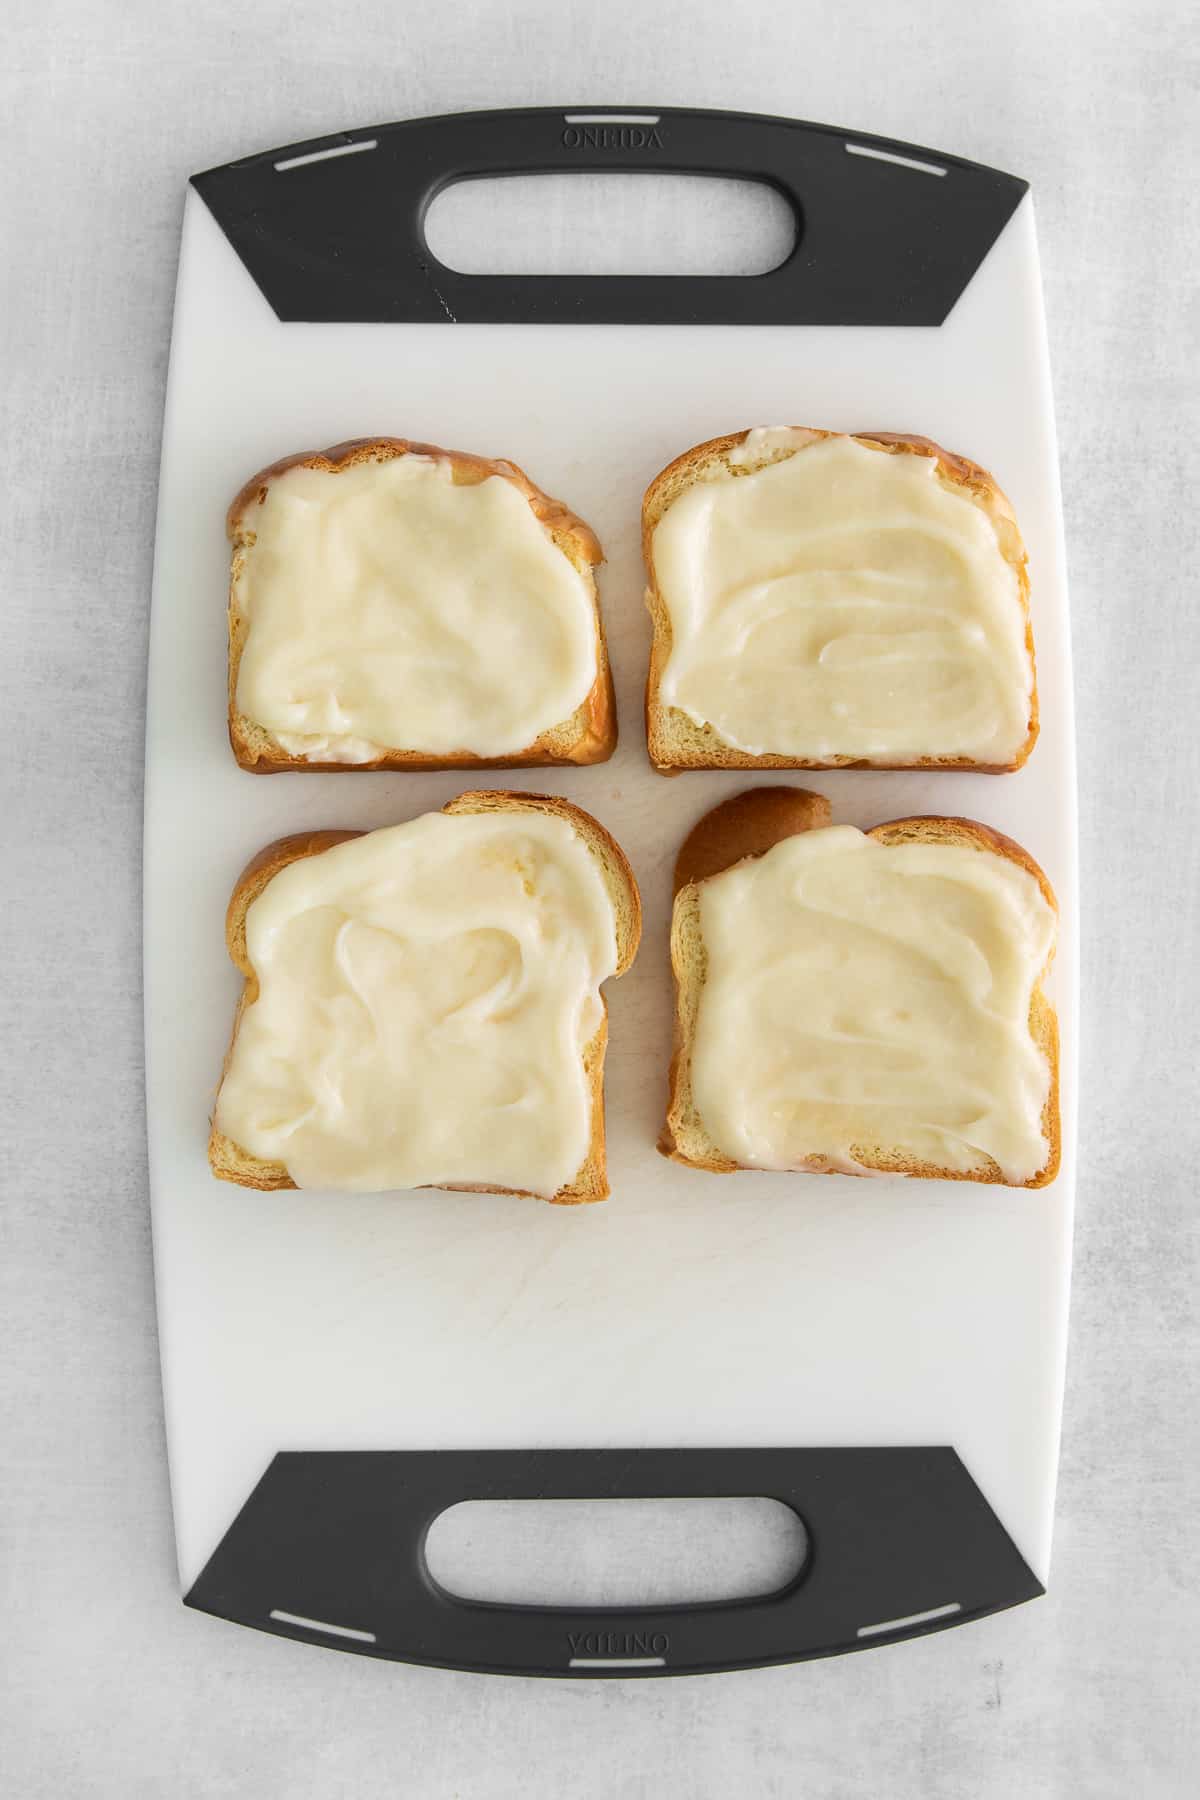 Cream cheese mixture on top of sliced bread.